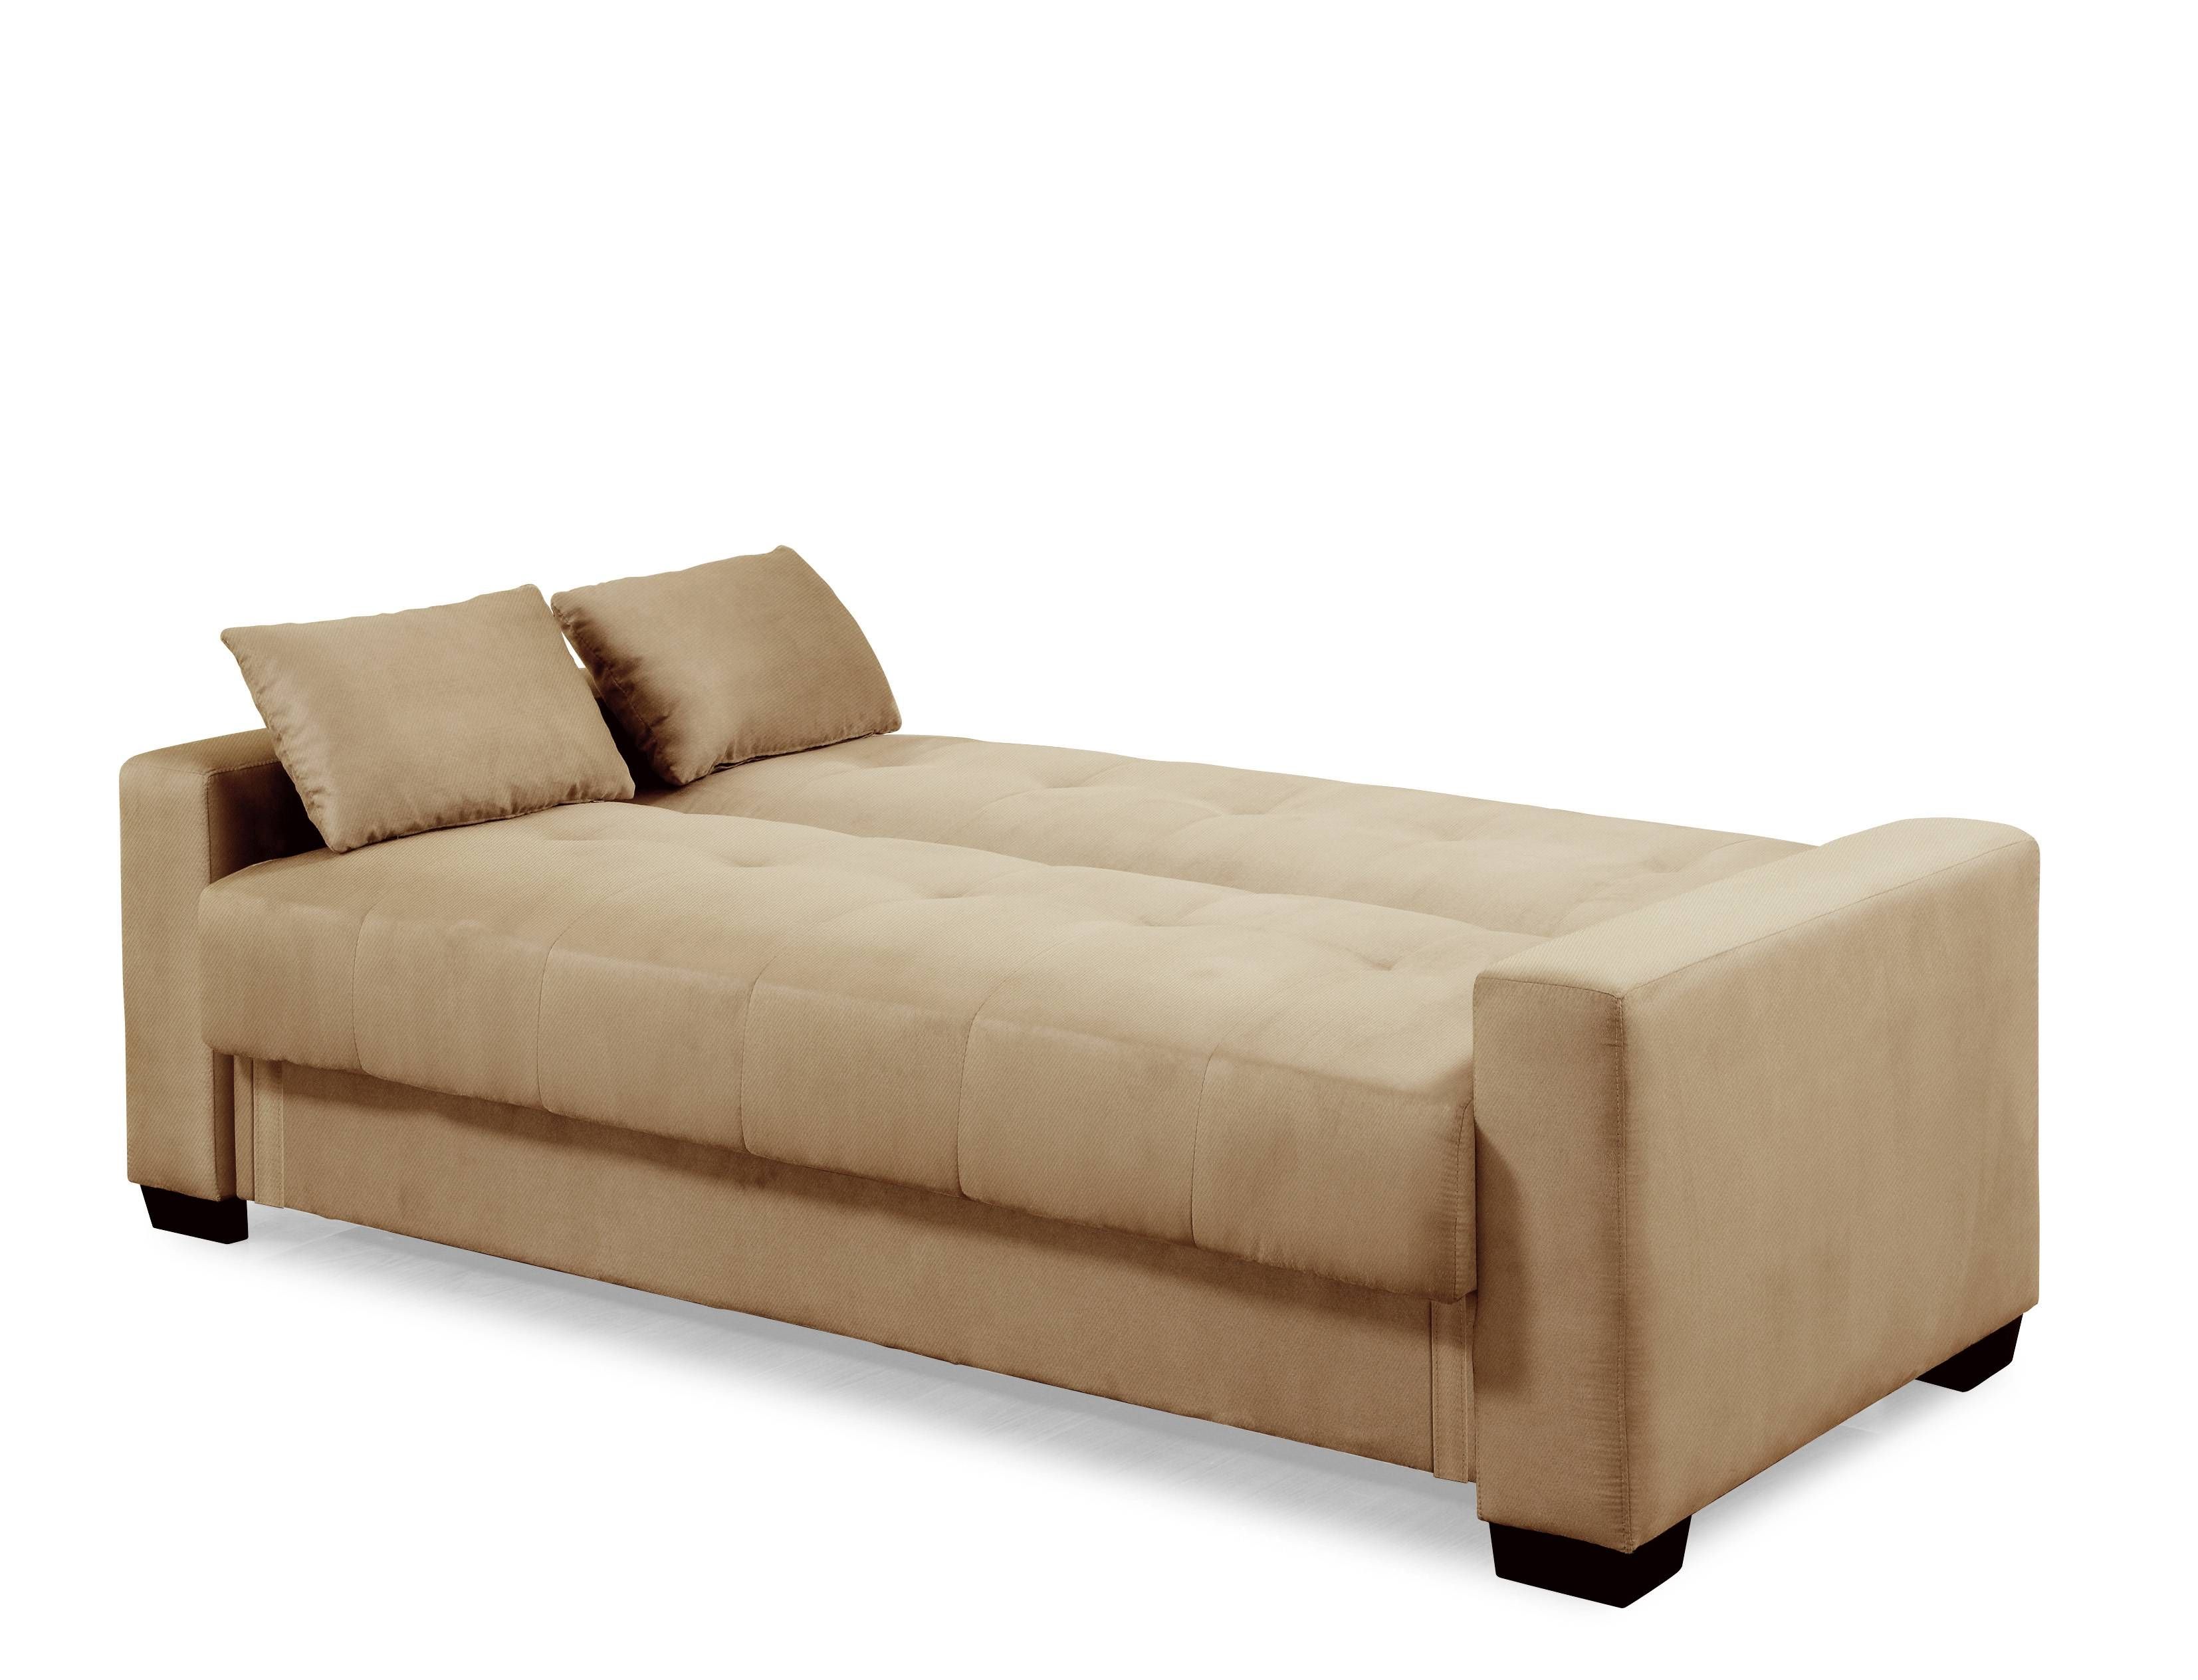 Ikea Ektorp Sleeper Sofa Bed | Bed Furniture Decoration In Sofas With Beds (View 22 of 30)